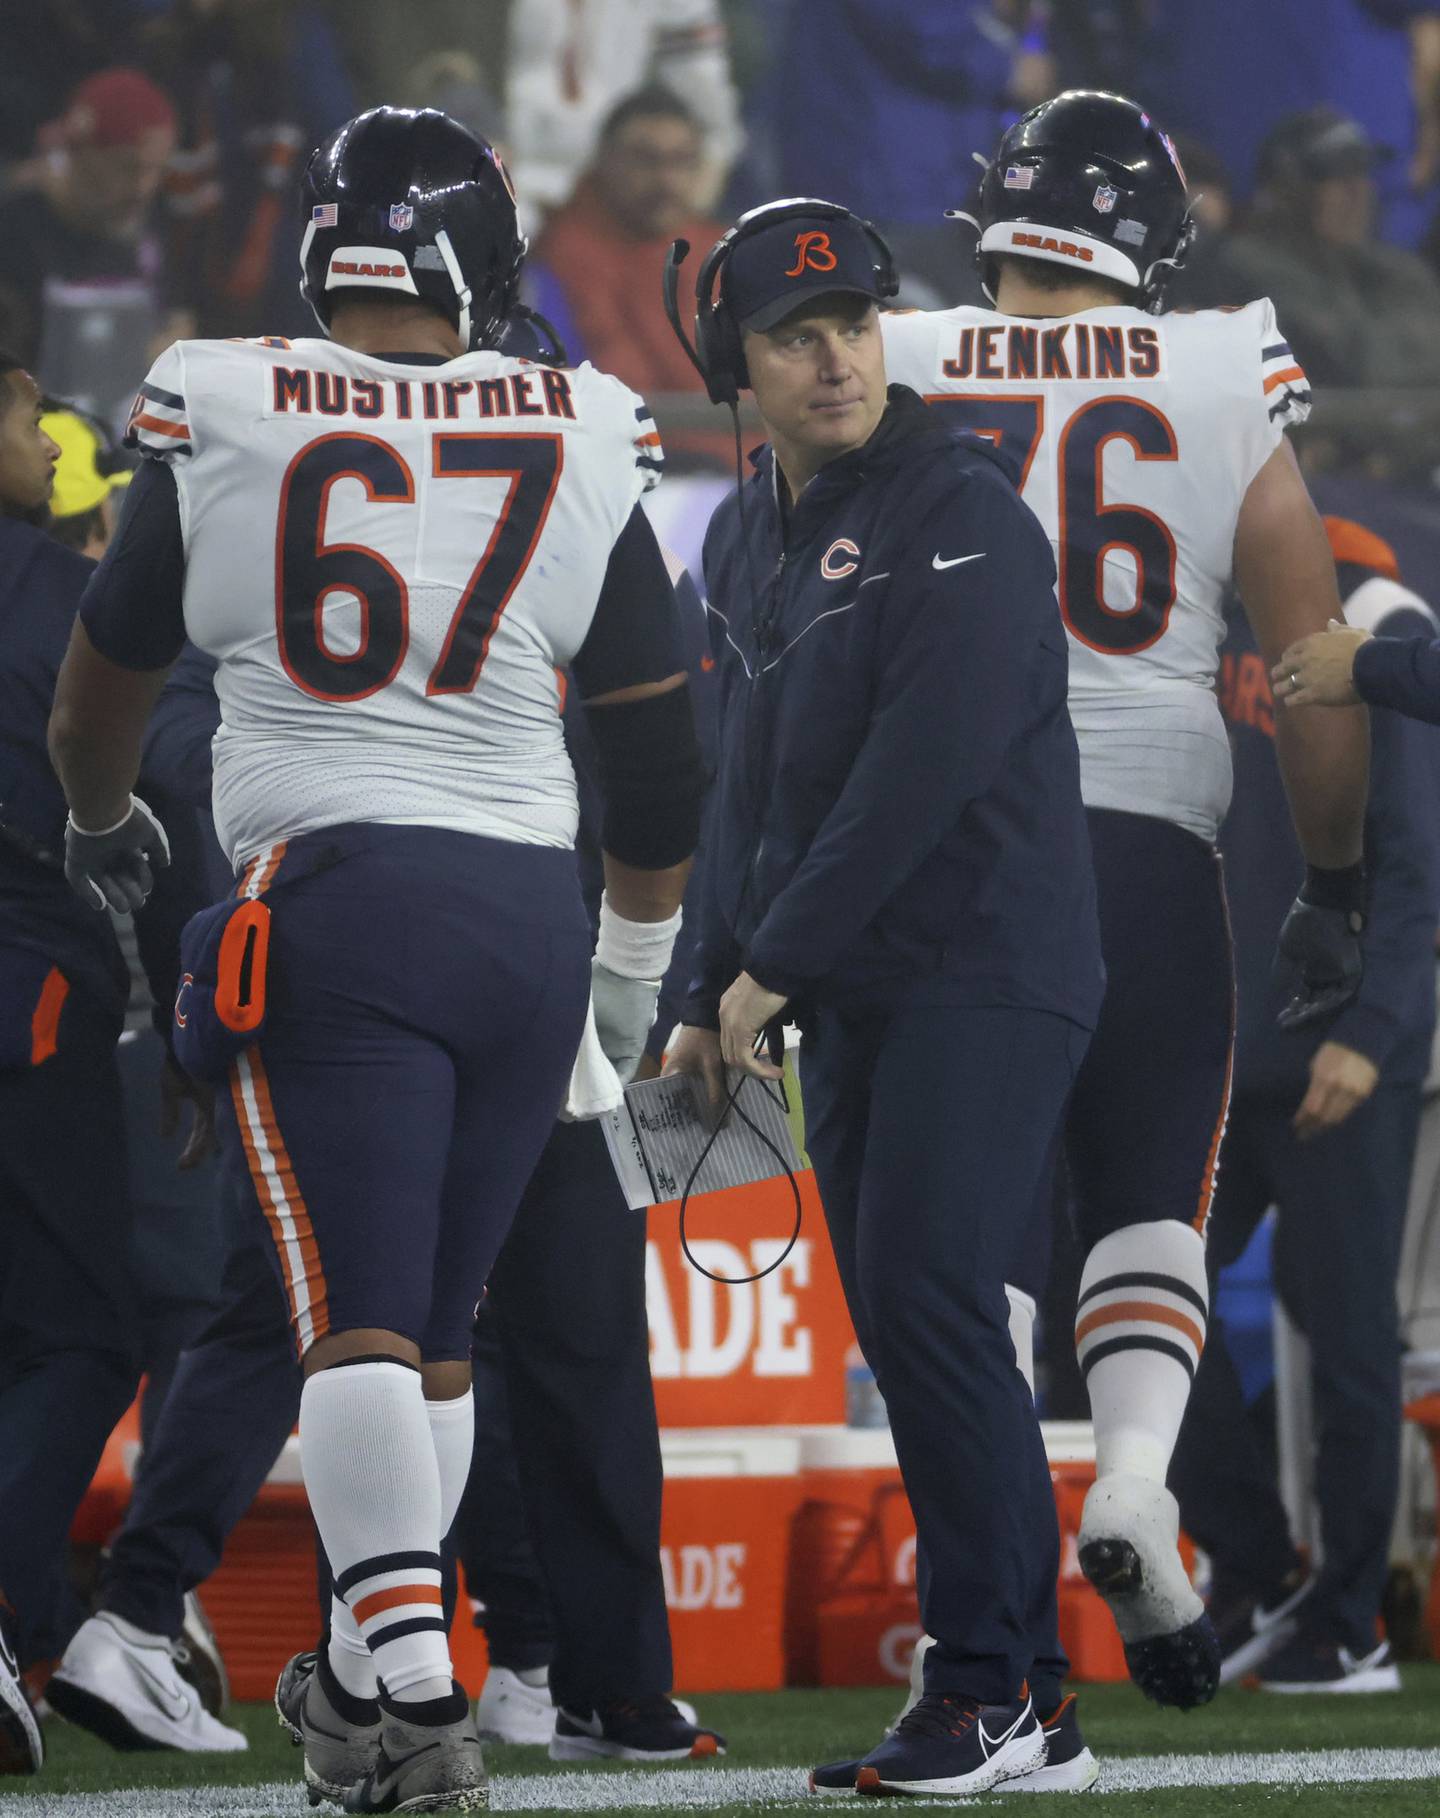 Bears coach Matt Eberflus looks to the field after watching center Sam Mustipher and offensive tackle Teven Jenkins head to the sideline after an offensive drive in the third quarter against the Patriots at Gillette Stadium on Oct. 24, 2022.